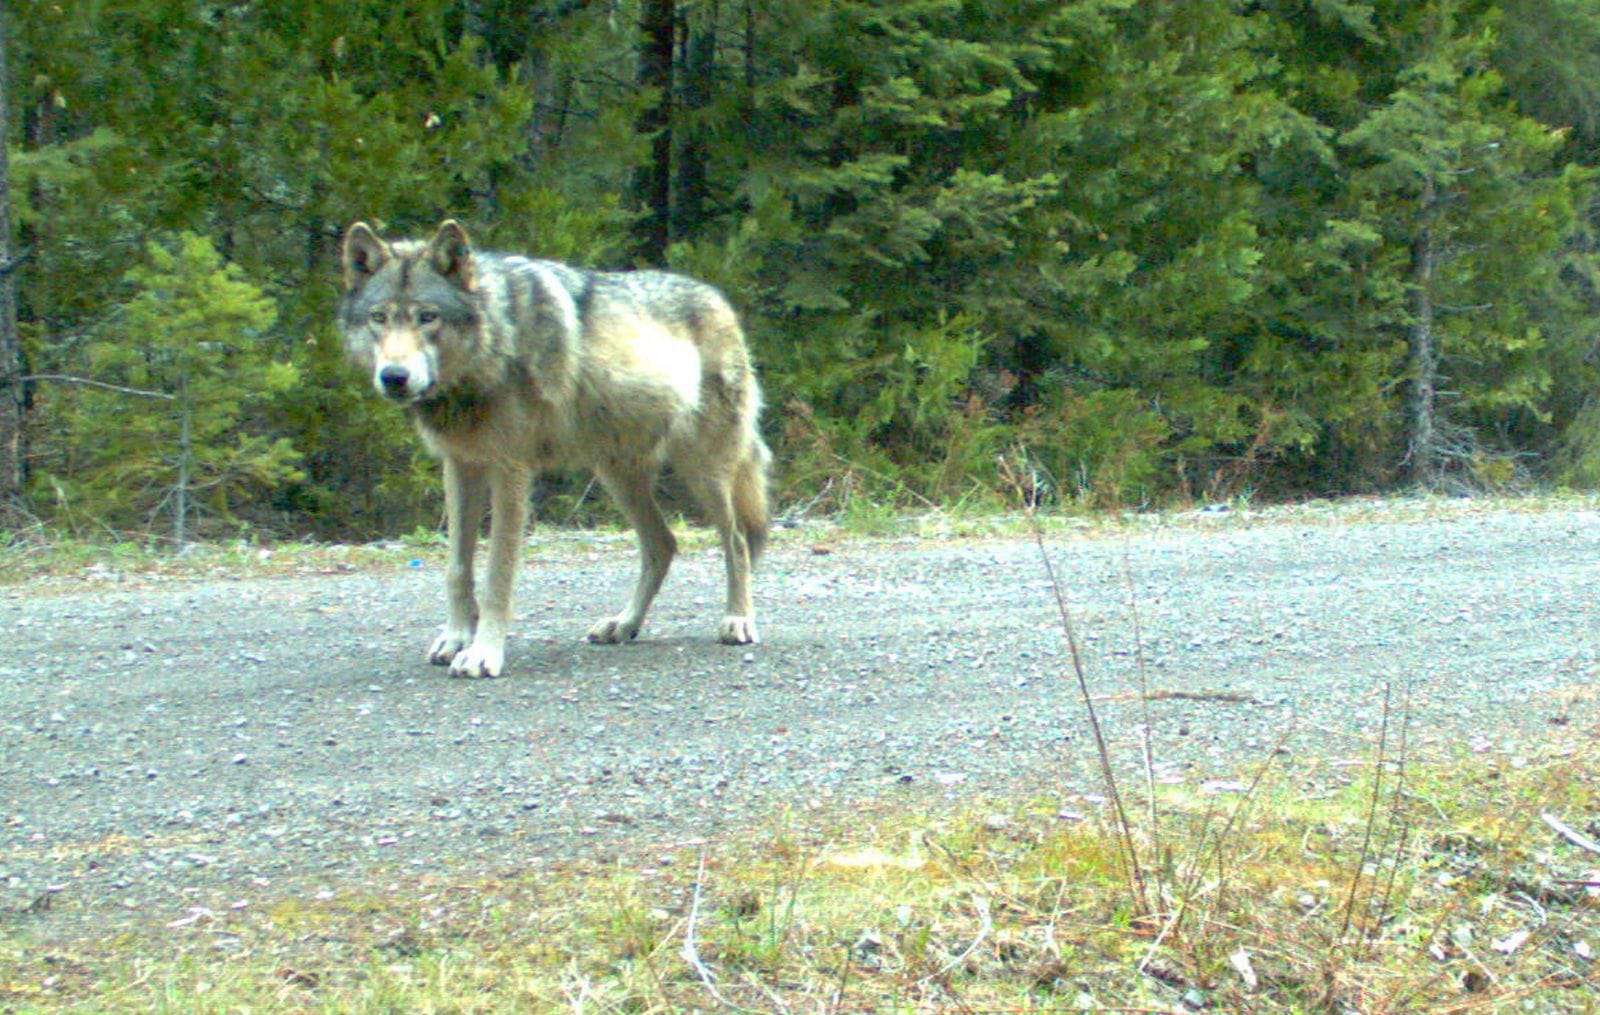 Remote camera photo of OR-7, captured May 3 in eastern Jackson County on U.S.